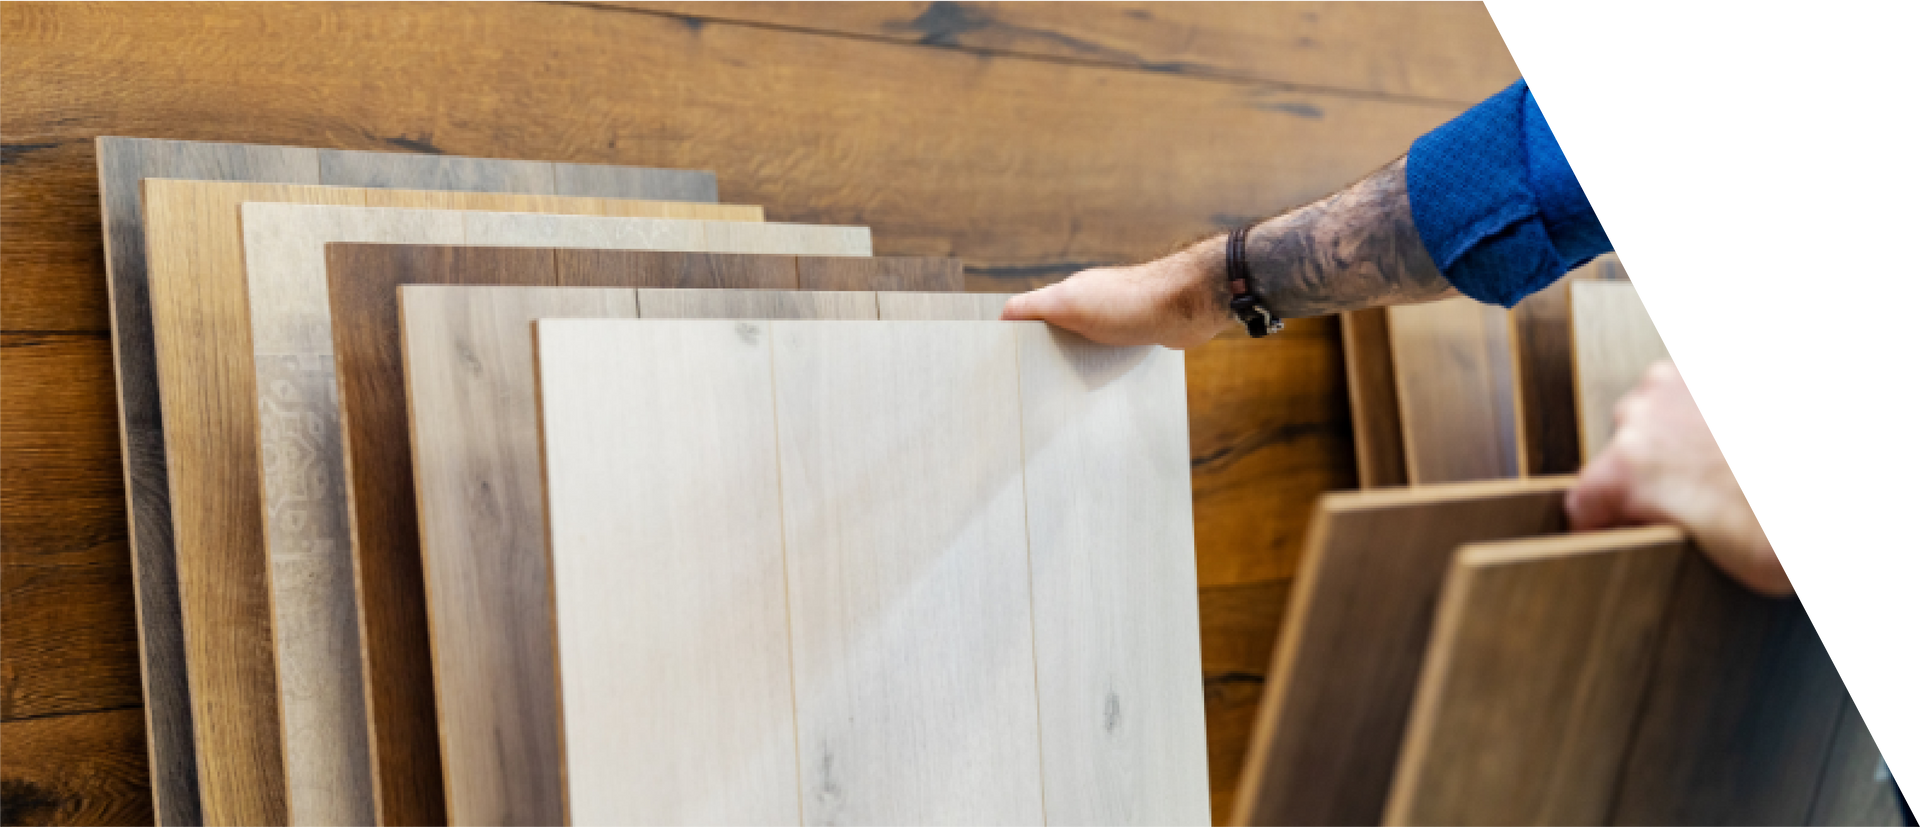 A person is pointing at a stack of wooden boards